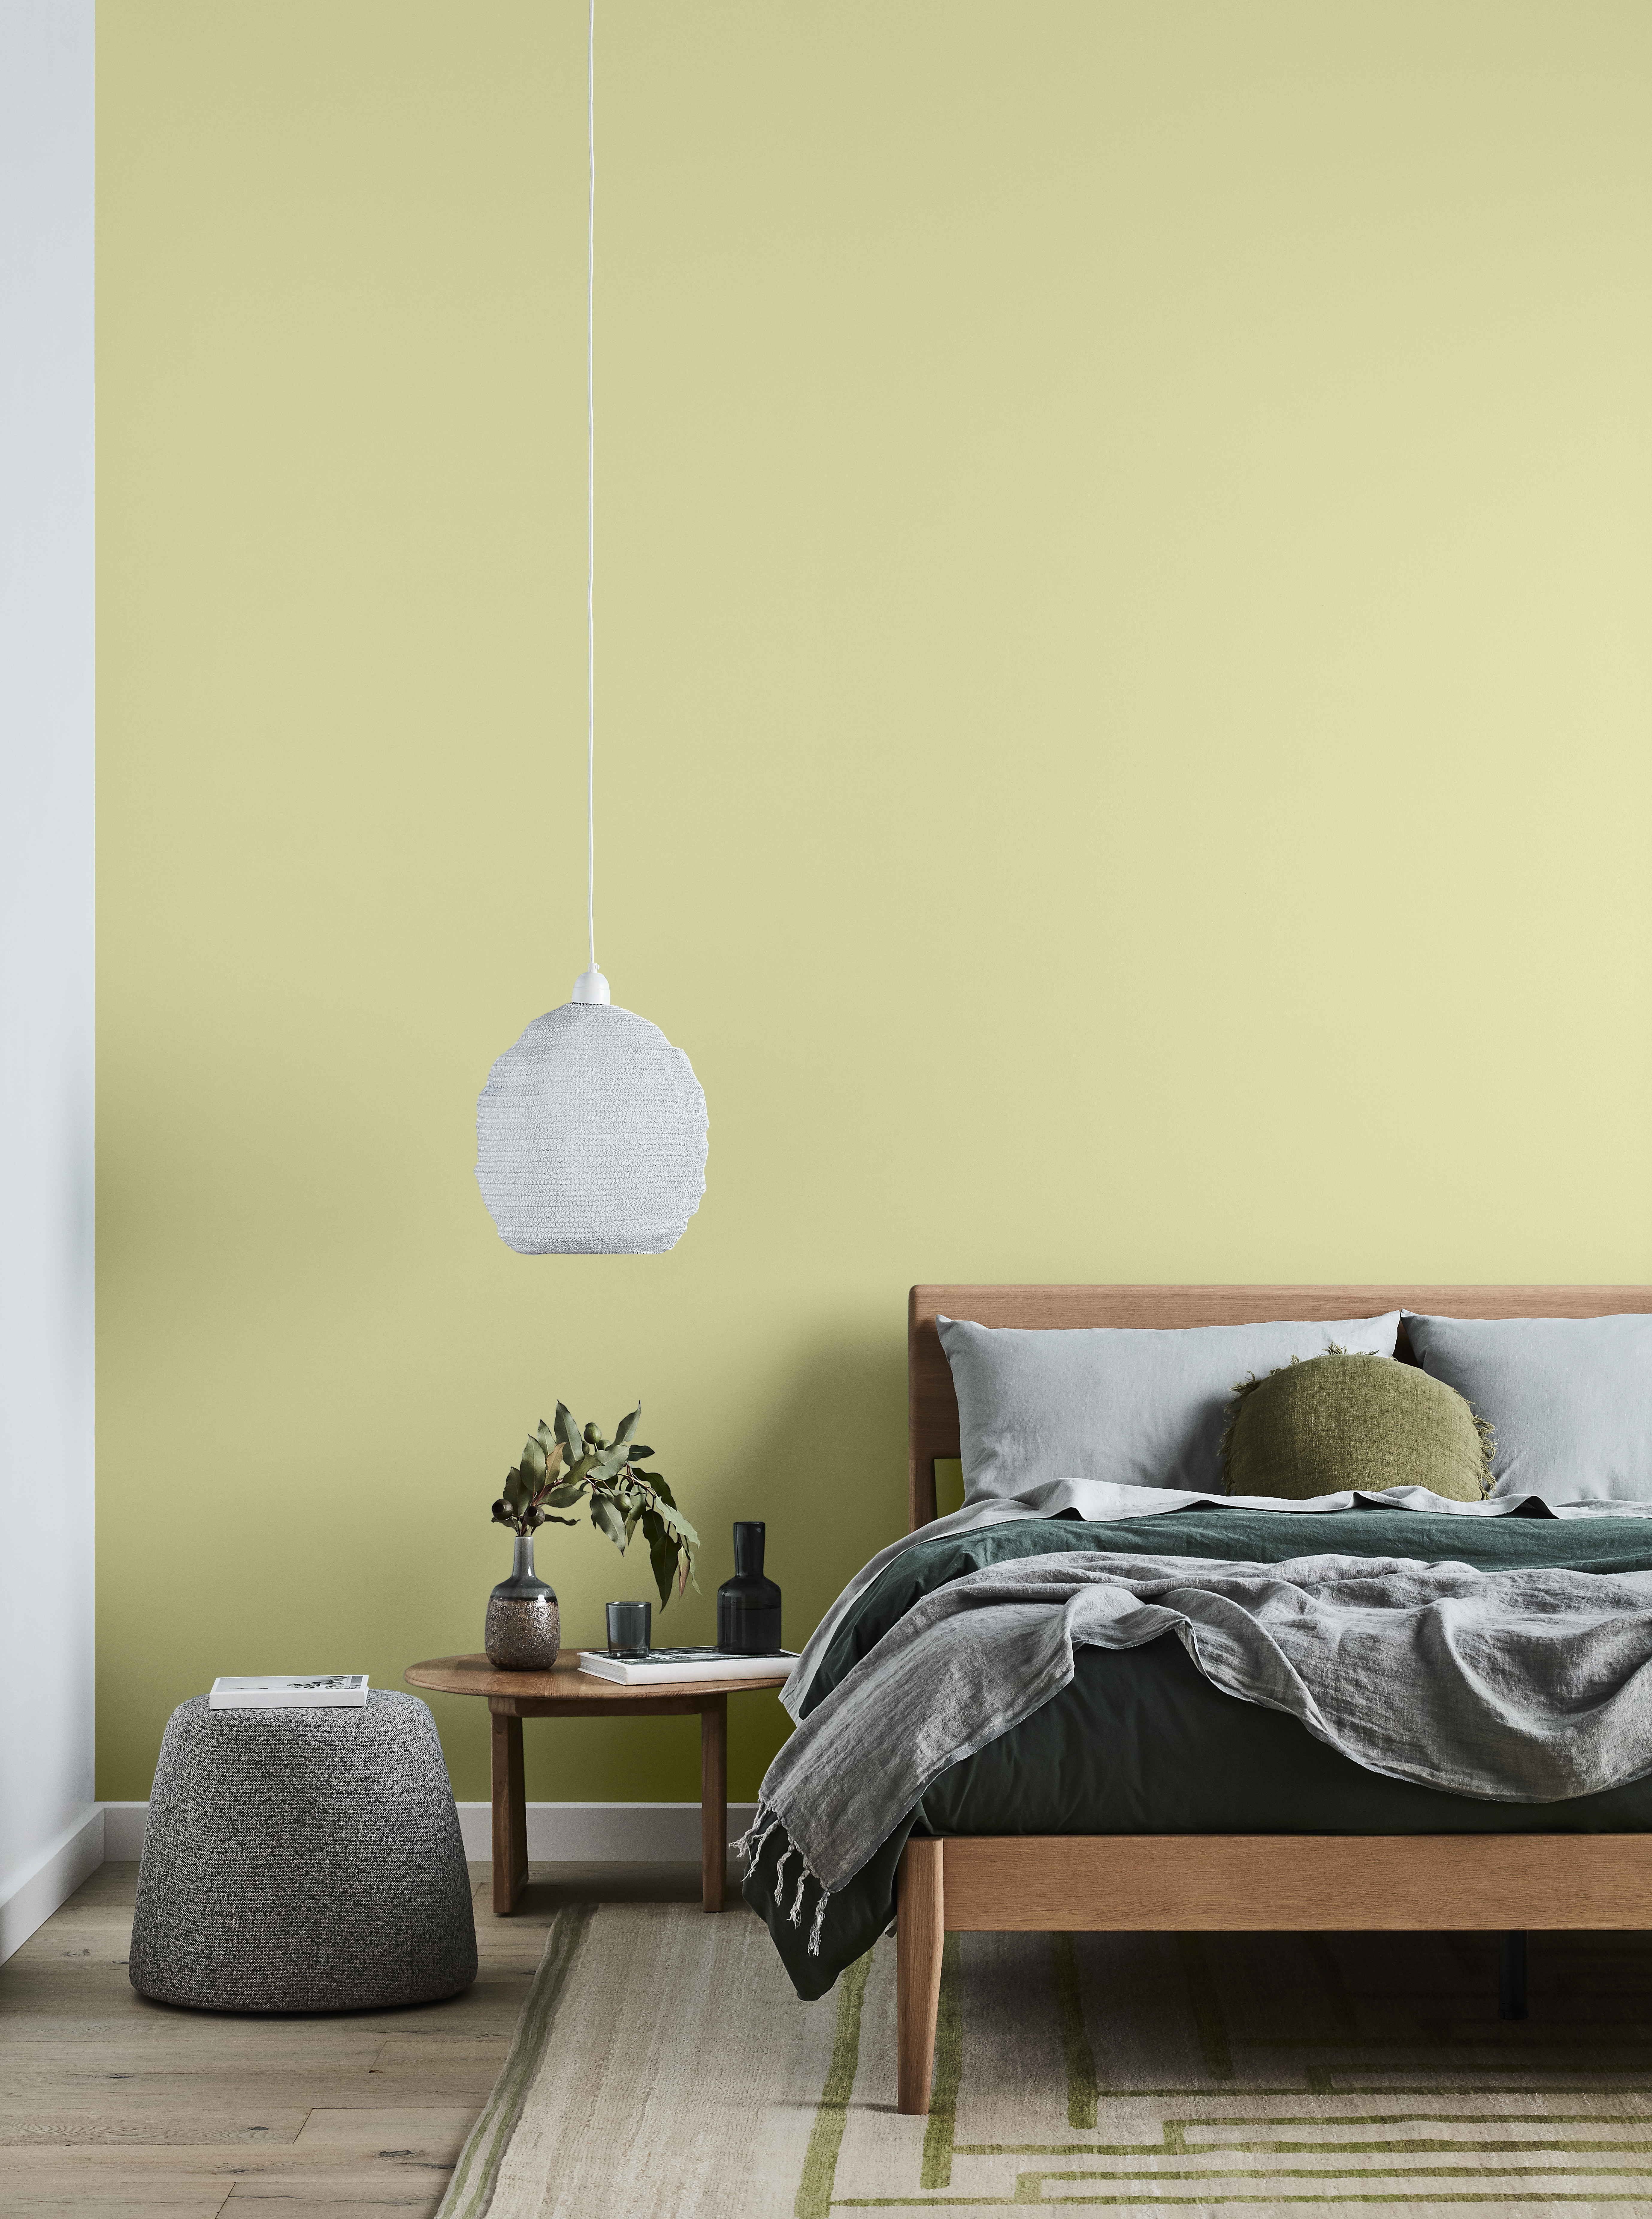 For a playful and fun look begin with a citrus yellow green and experiment with block colour and contrasting hues.